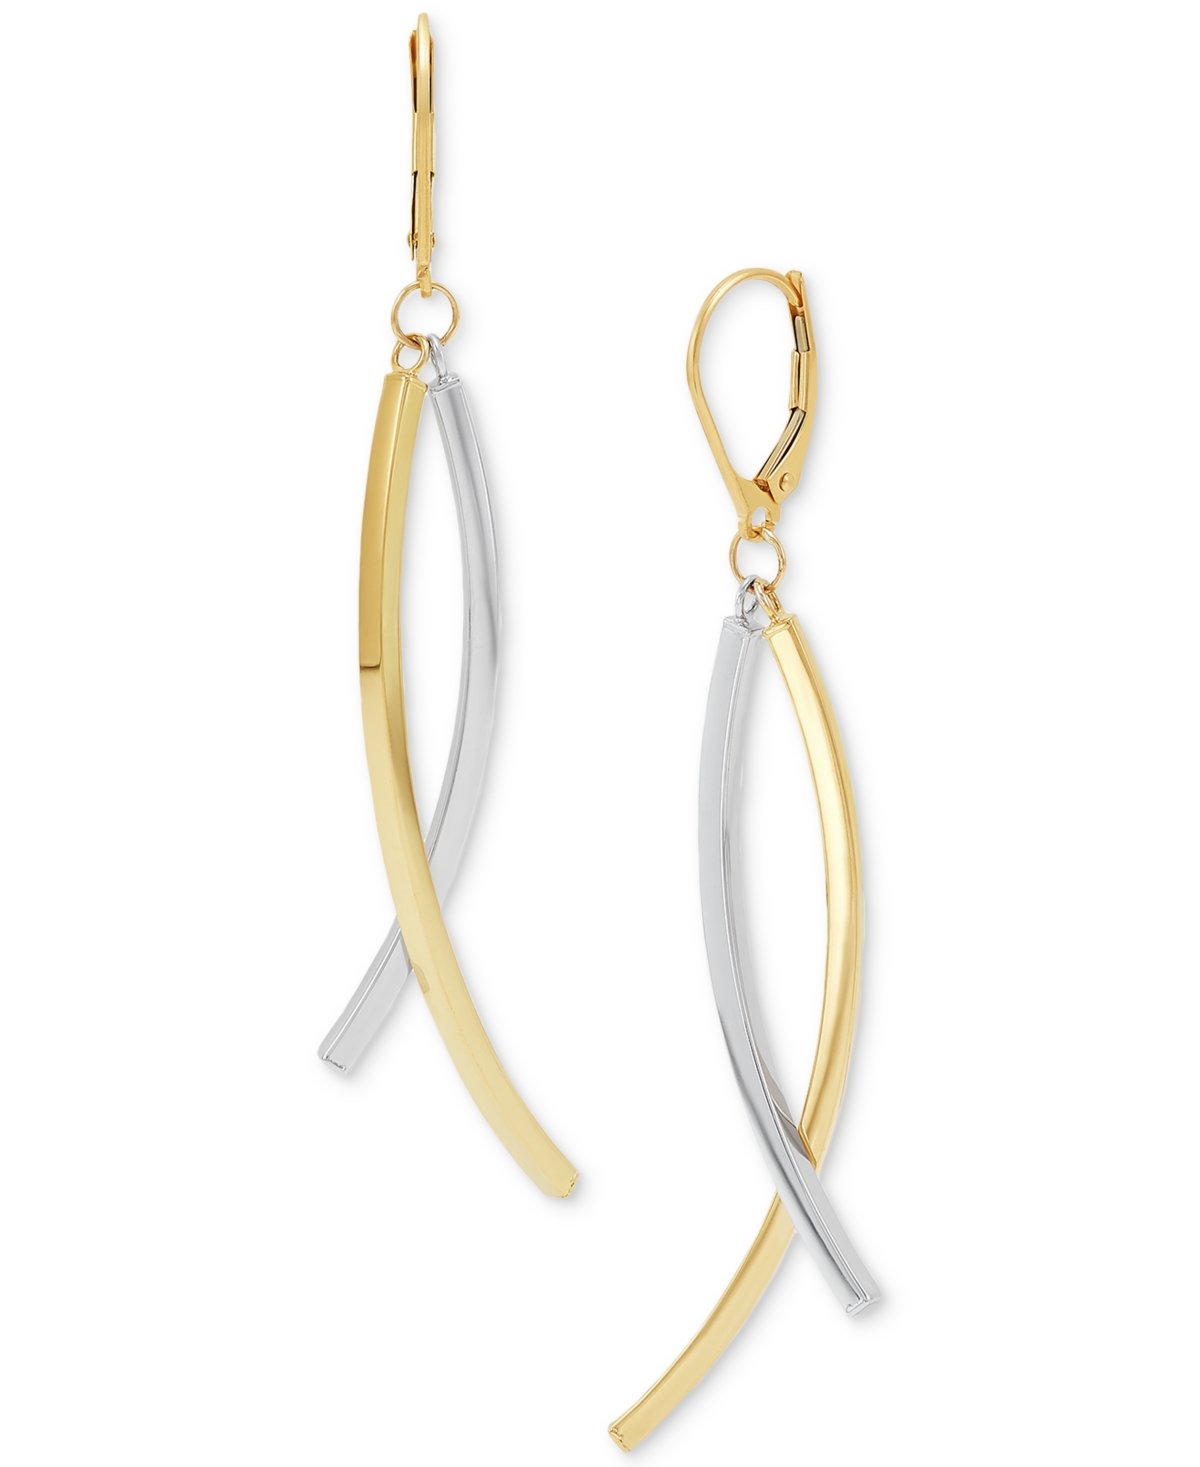 Curved Stick Crossover Drop Earrings in 10k Two-Tone Gold, Created for Macy's - Gold